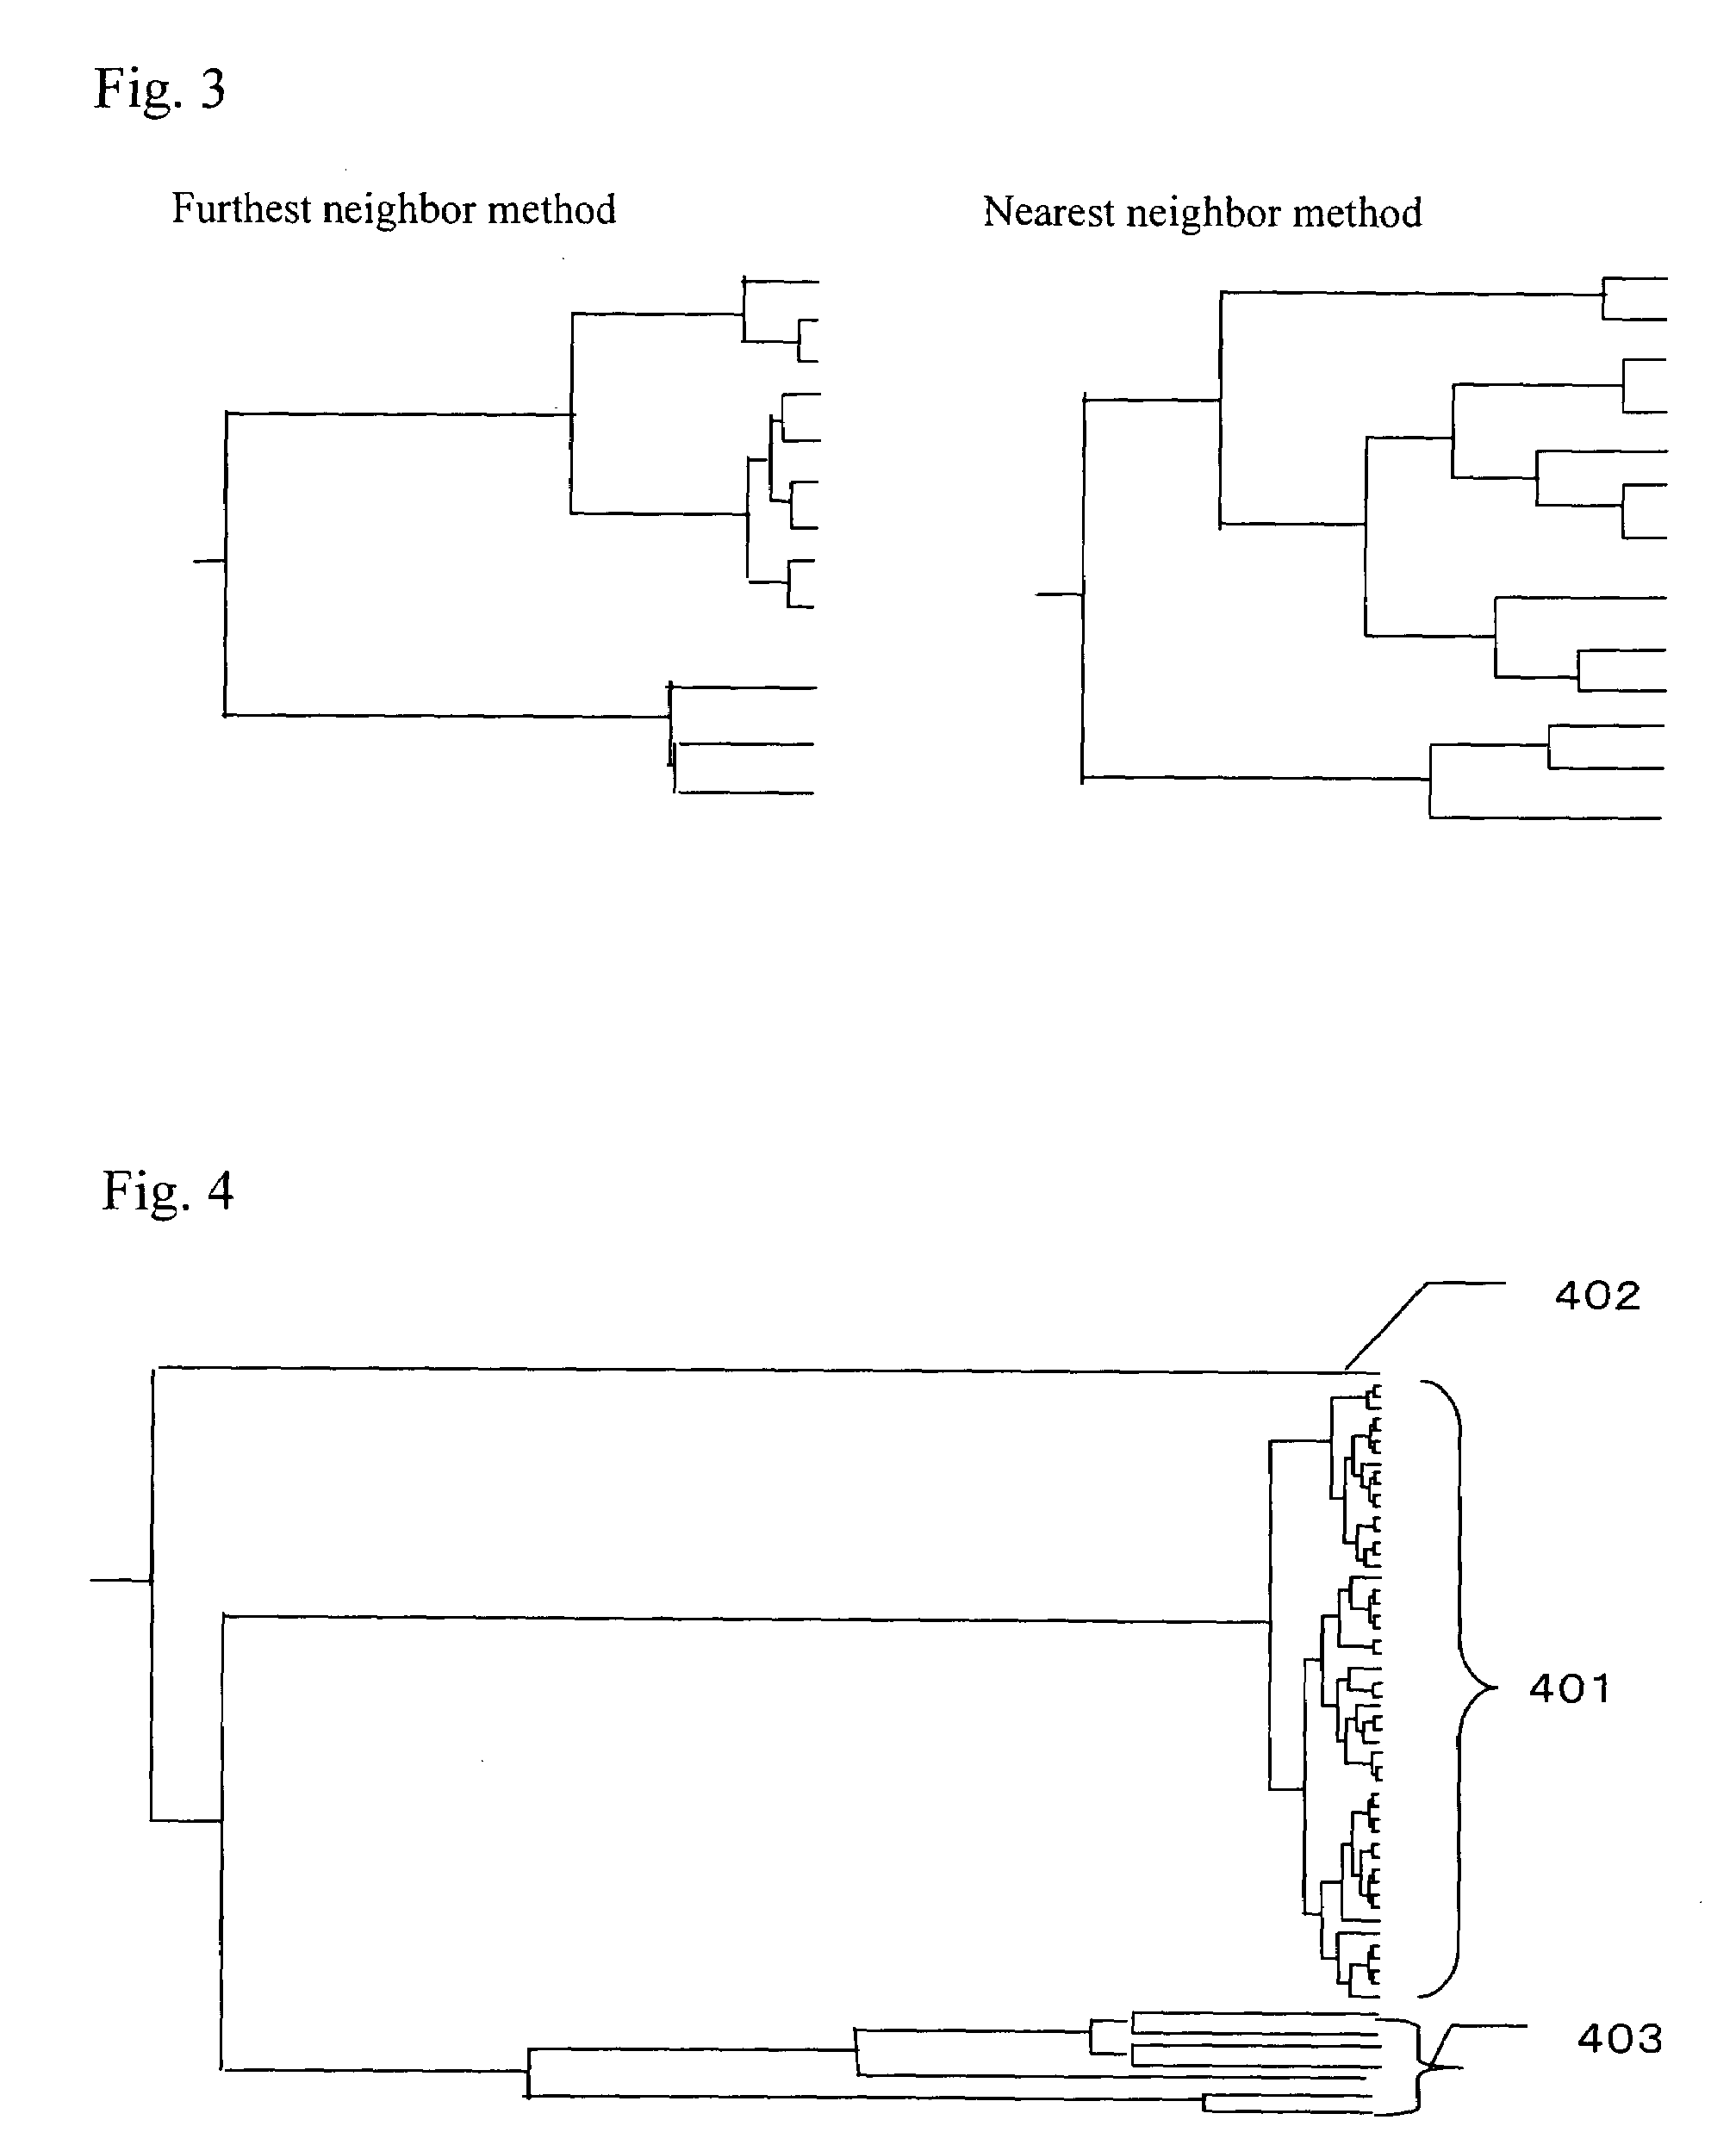 Method and system for displaying dendrogram